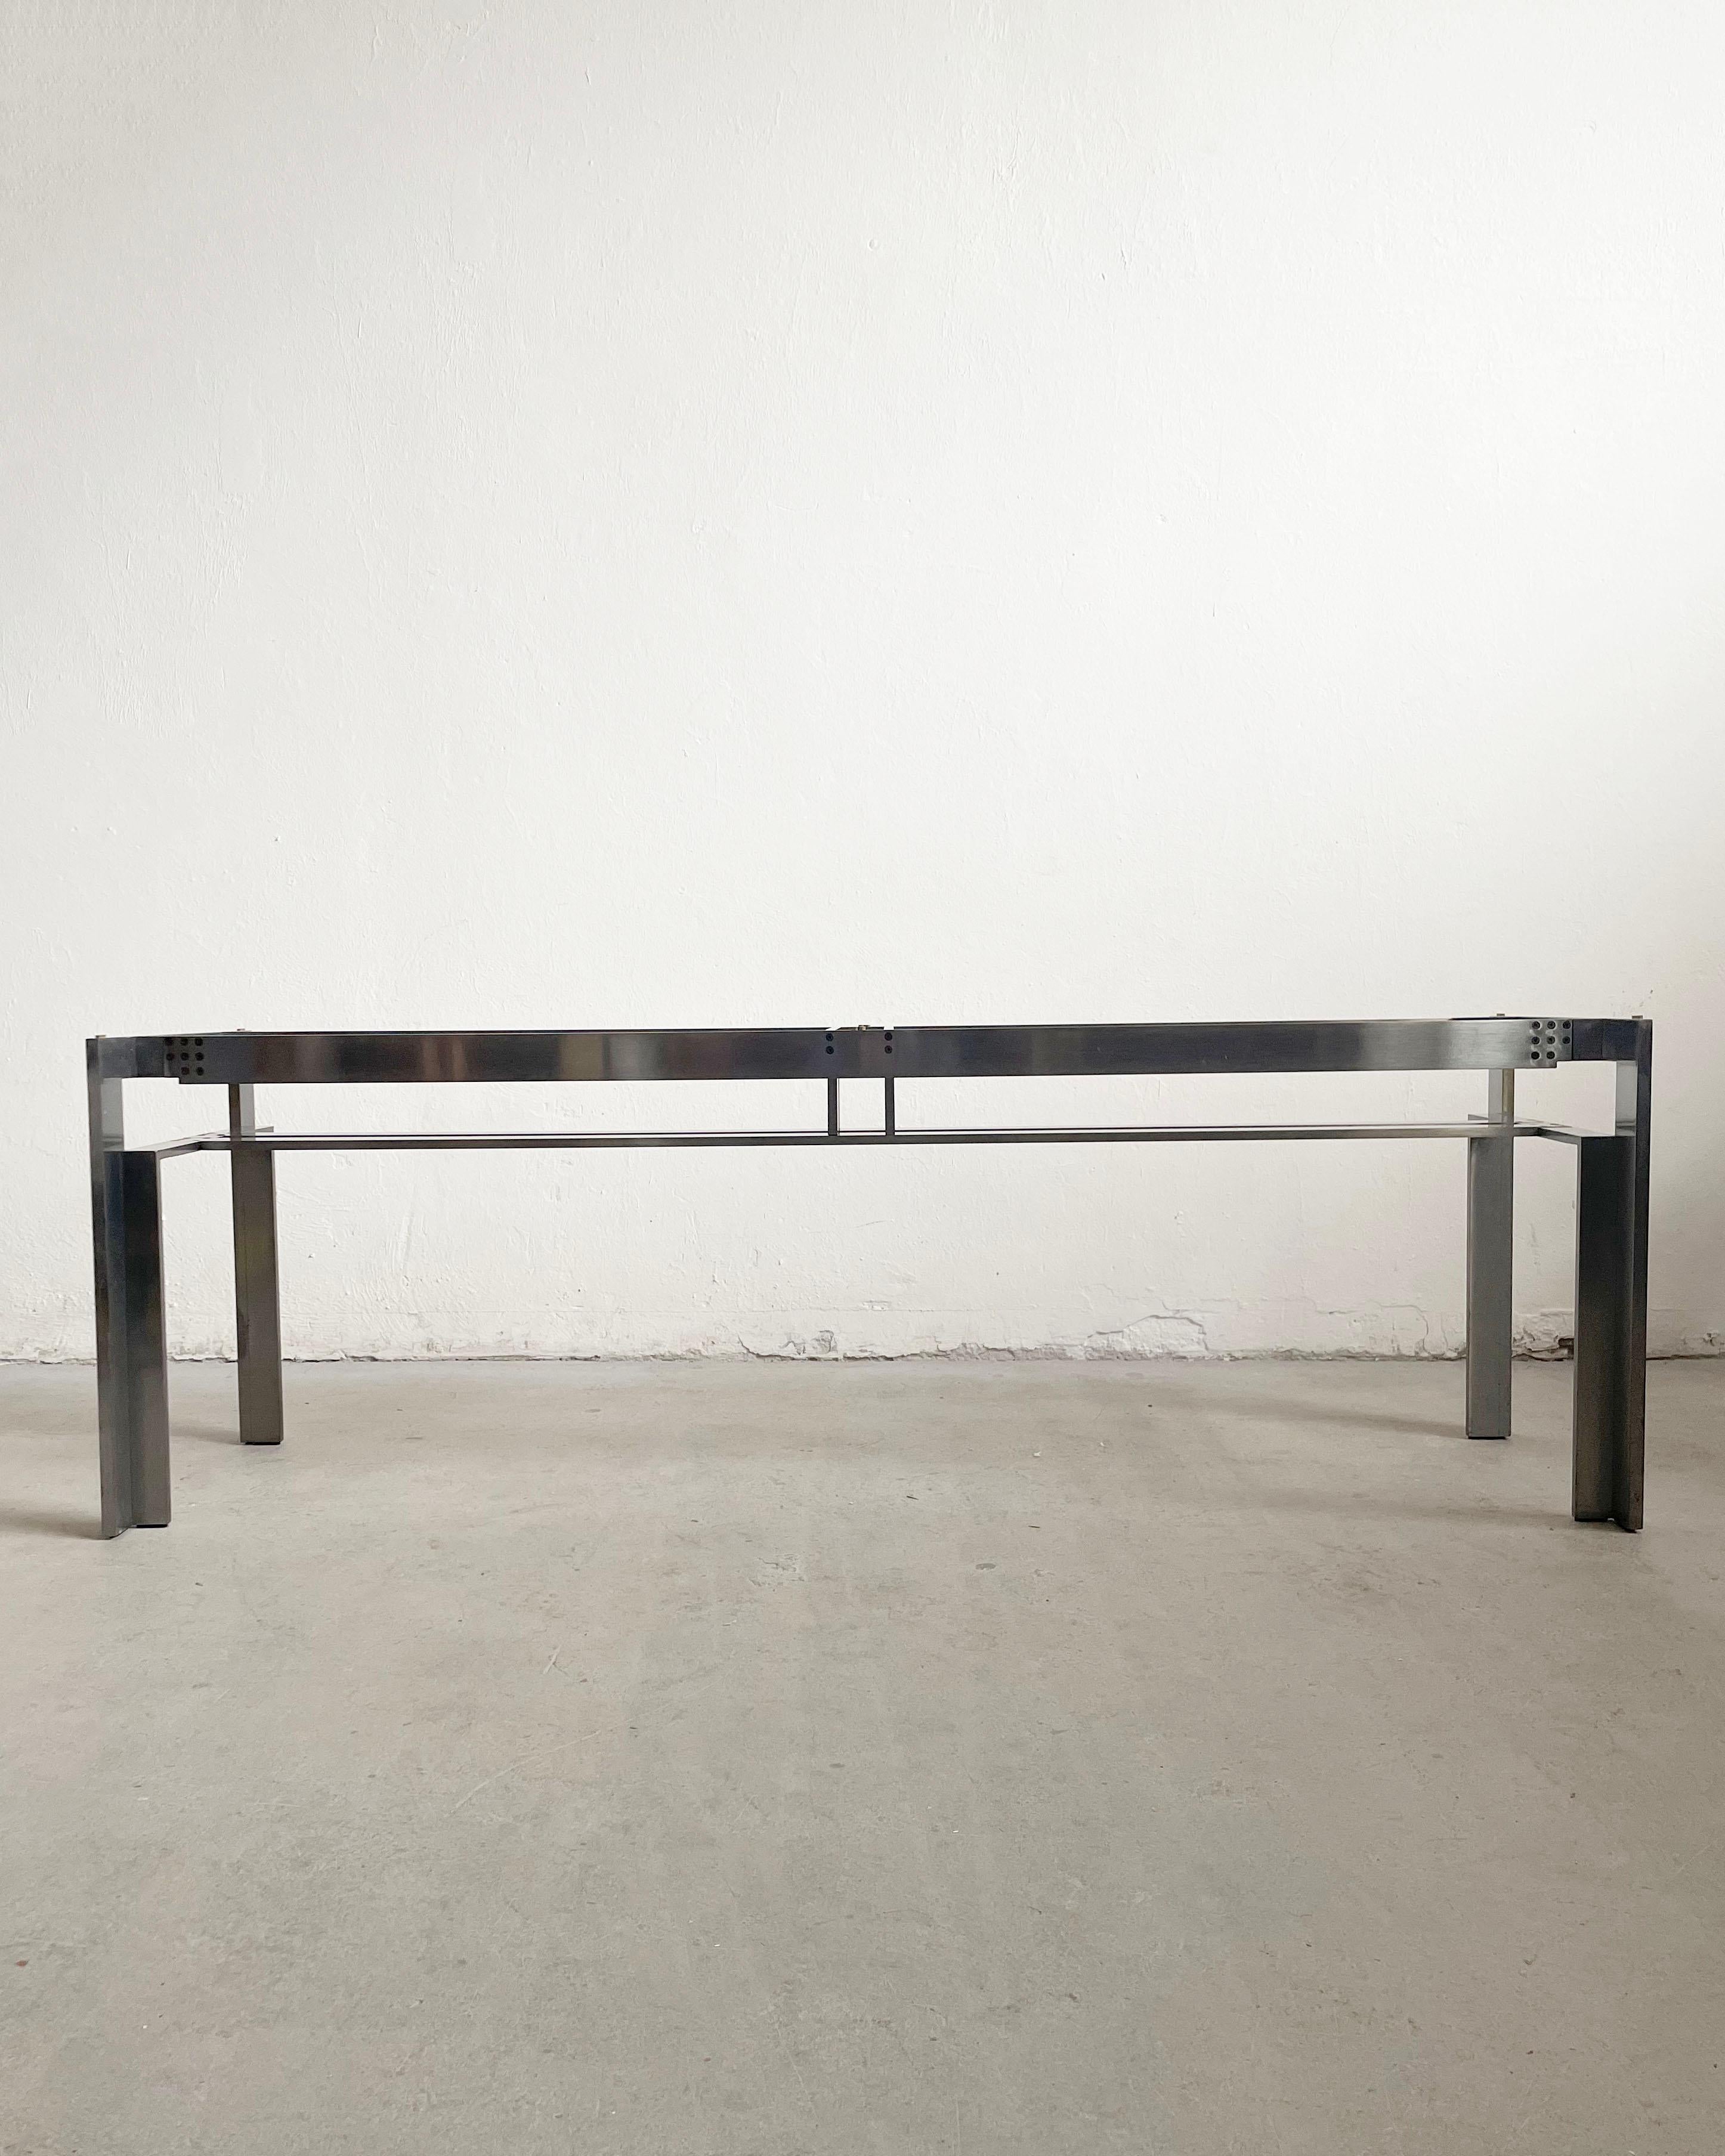 Doge table in glass and steel, designed in 1968 by one of the most influential Italian architects and designers Carlo Scarpa for the great Italian visionary Dino Gavina and his company Simon, represents the very first product of the Ultrarazionale